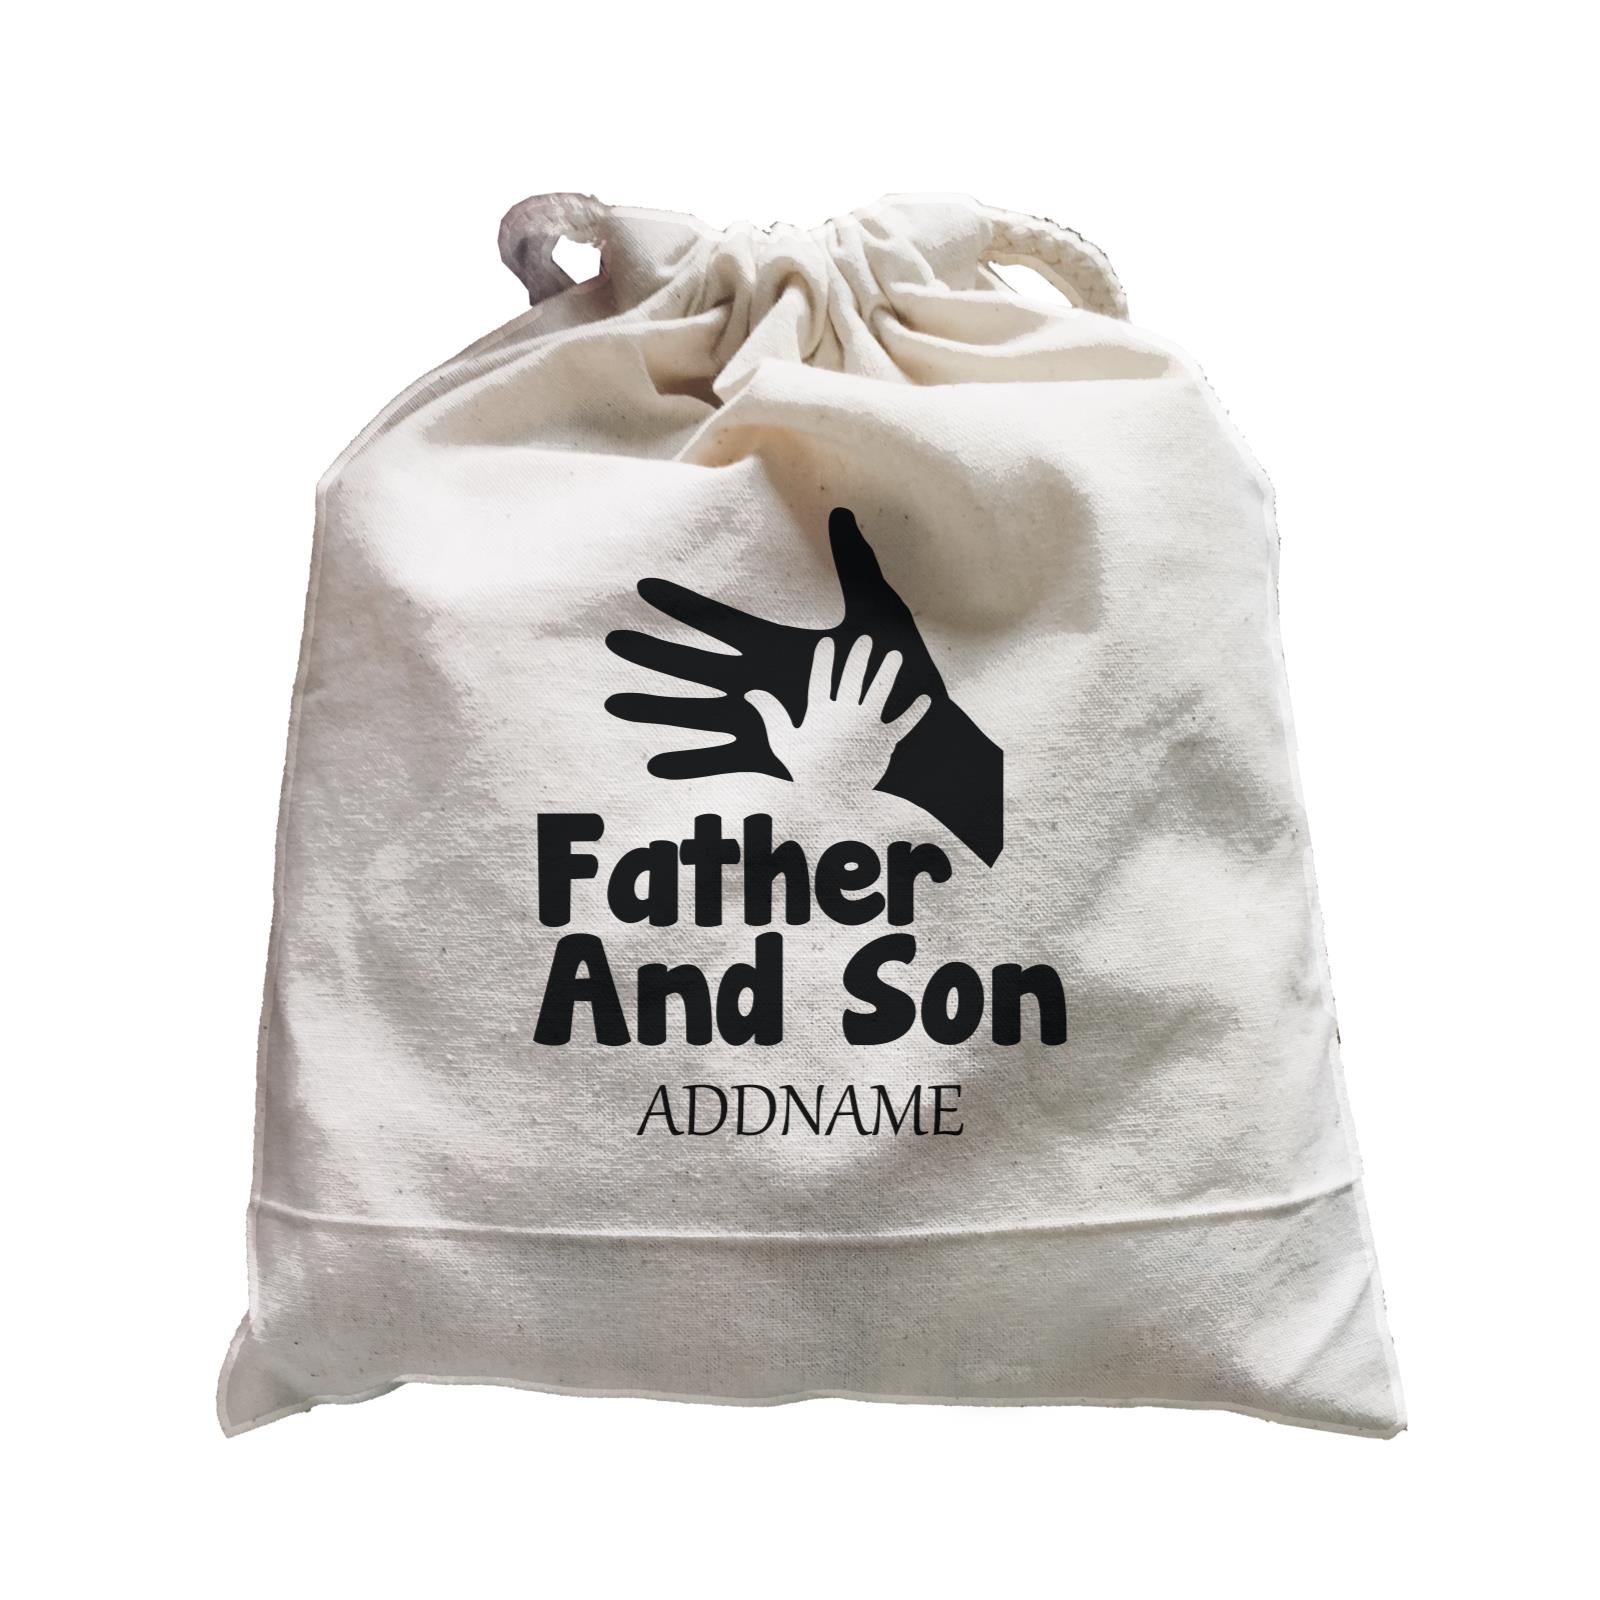 Hands Family Father And Son Addname Satchel